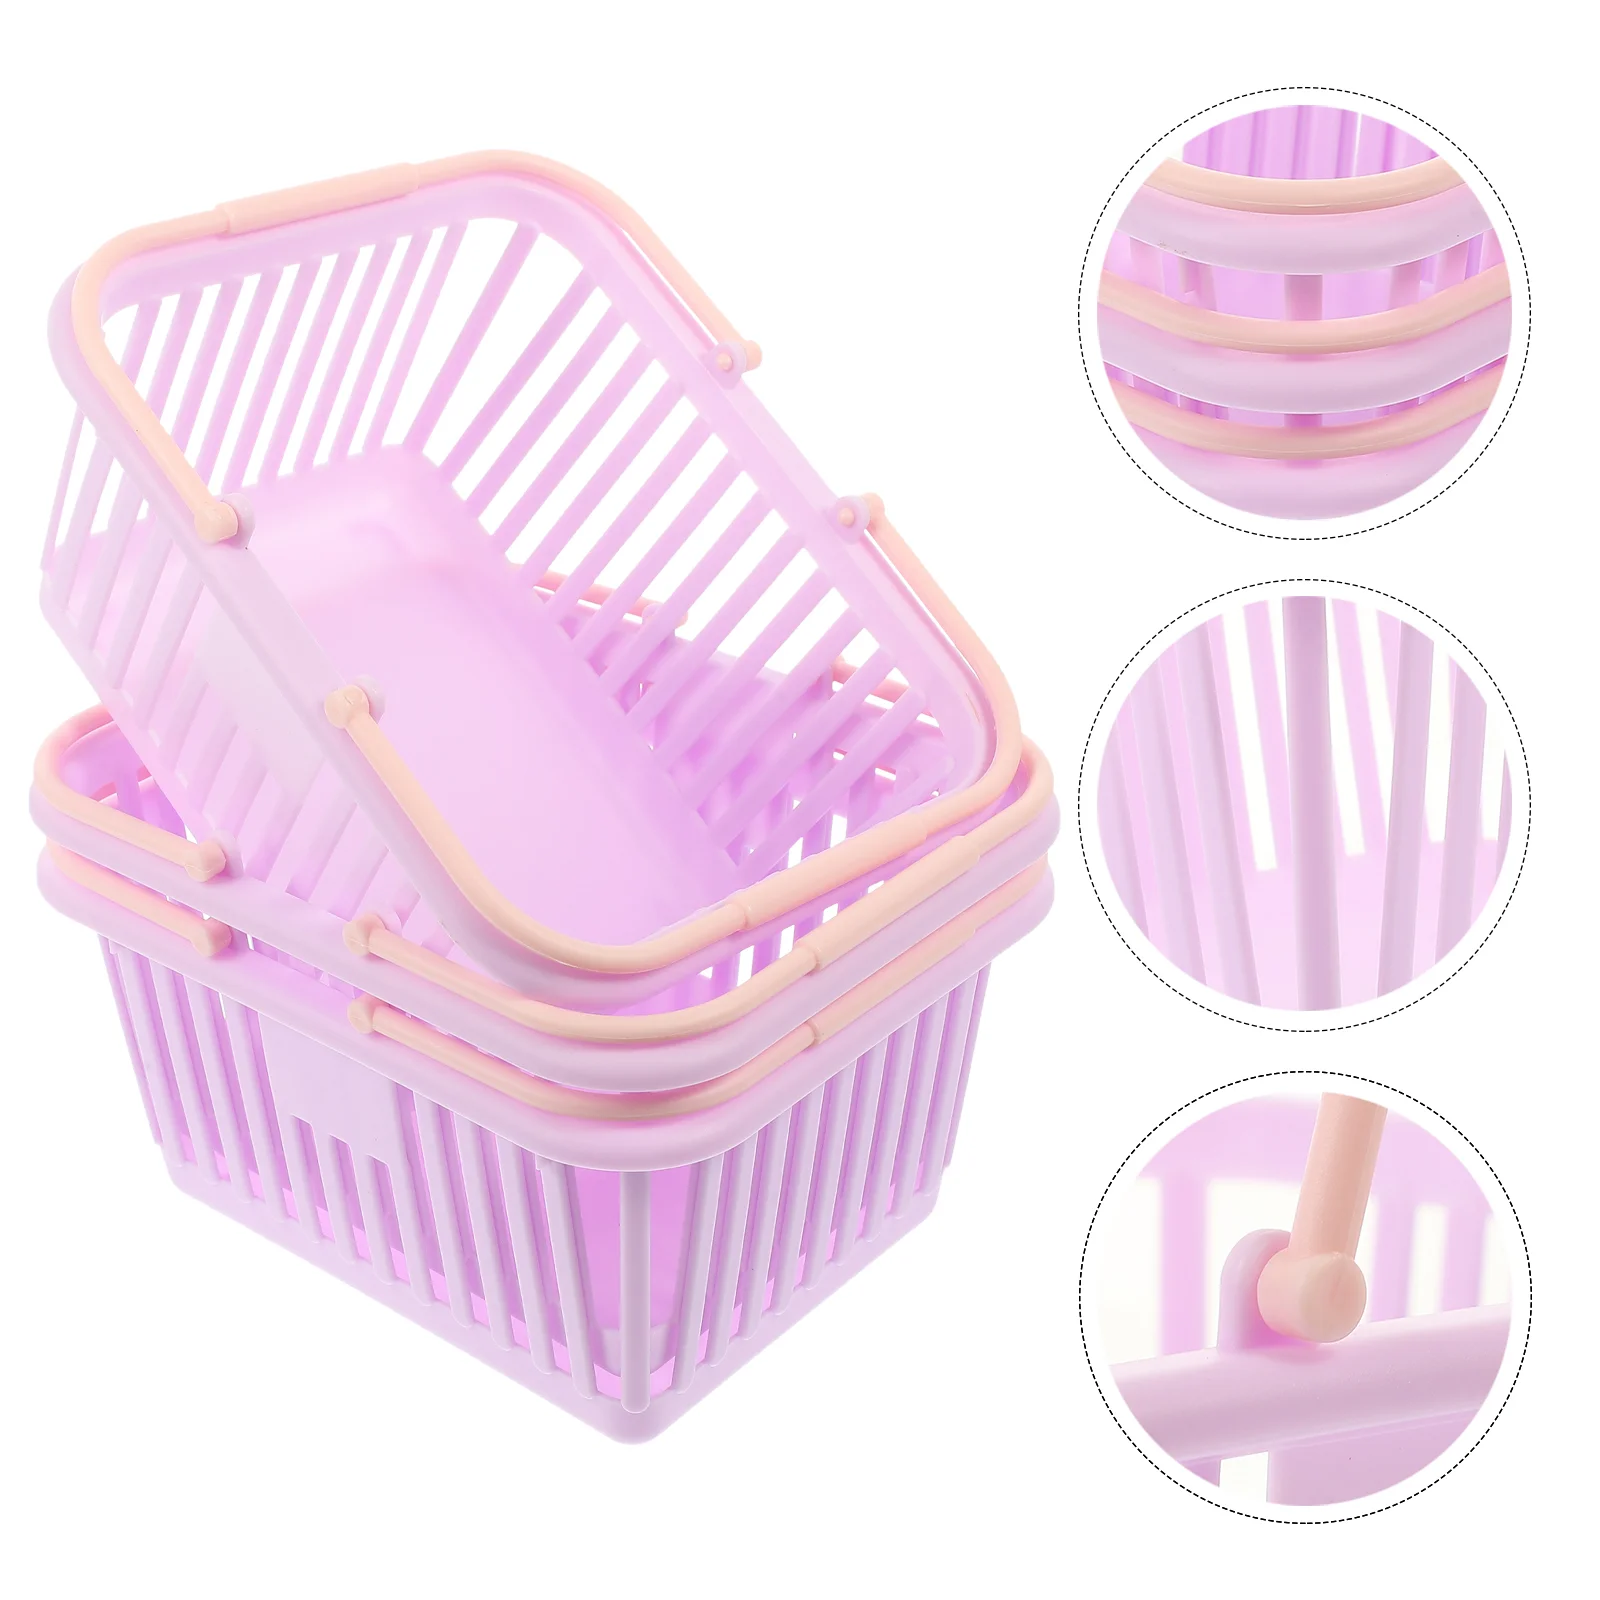 

Storage Basket Baskets Organizing Bathroom Small Shower Grocery Handles Plastic Containers Shopping